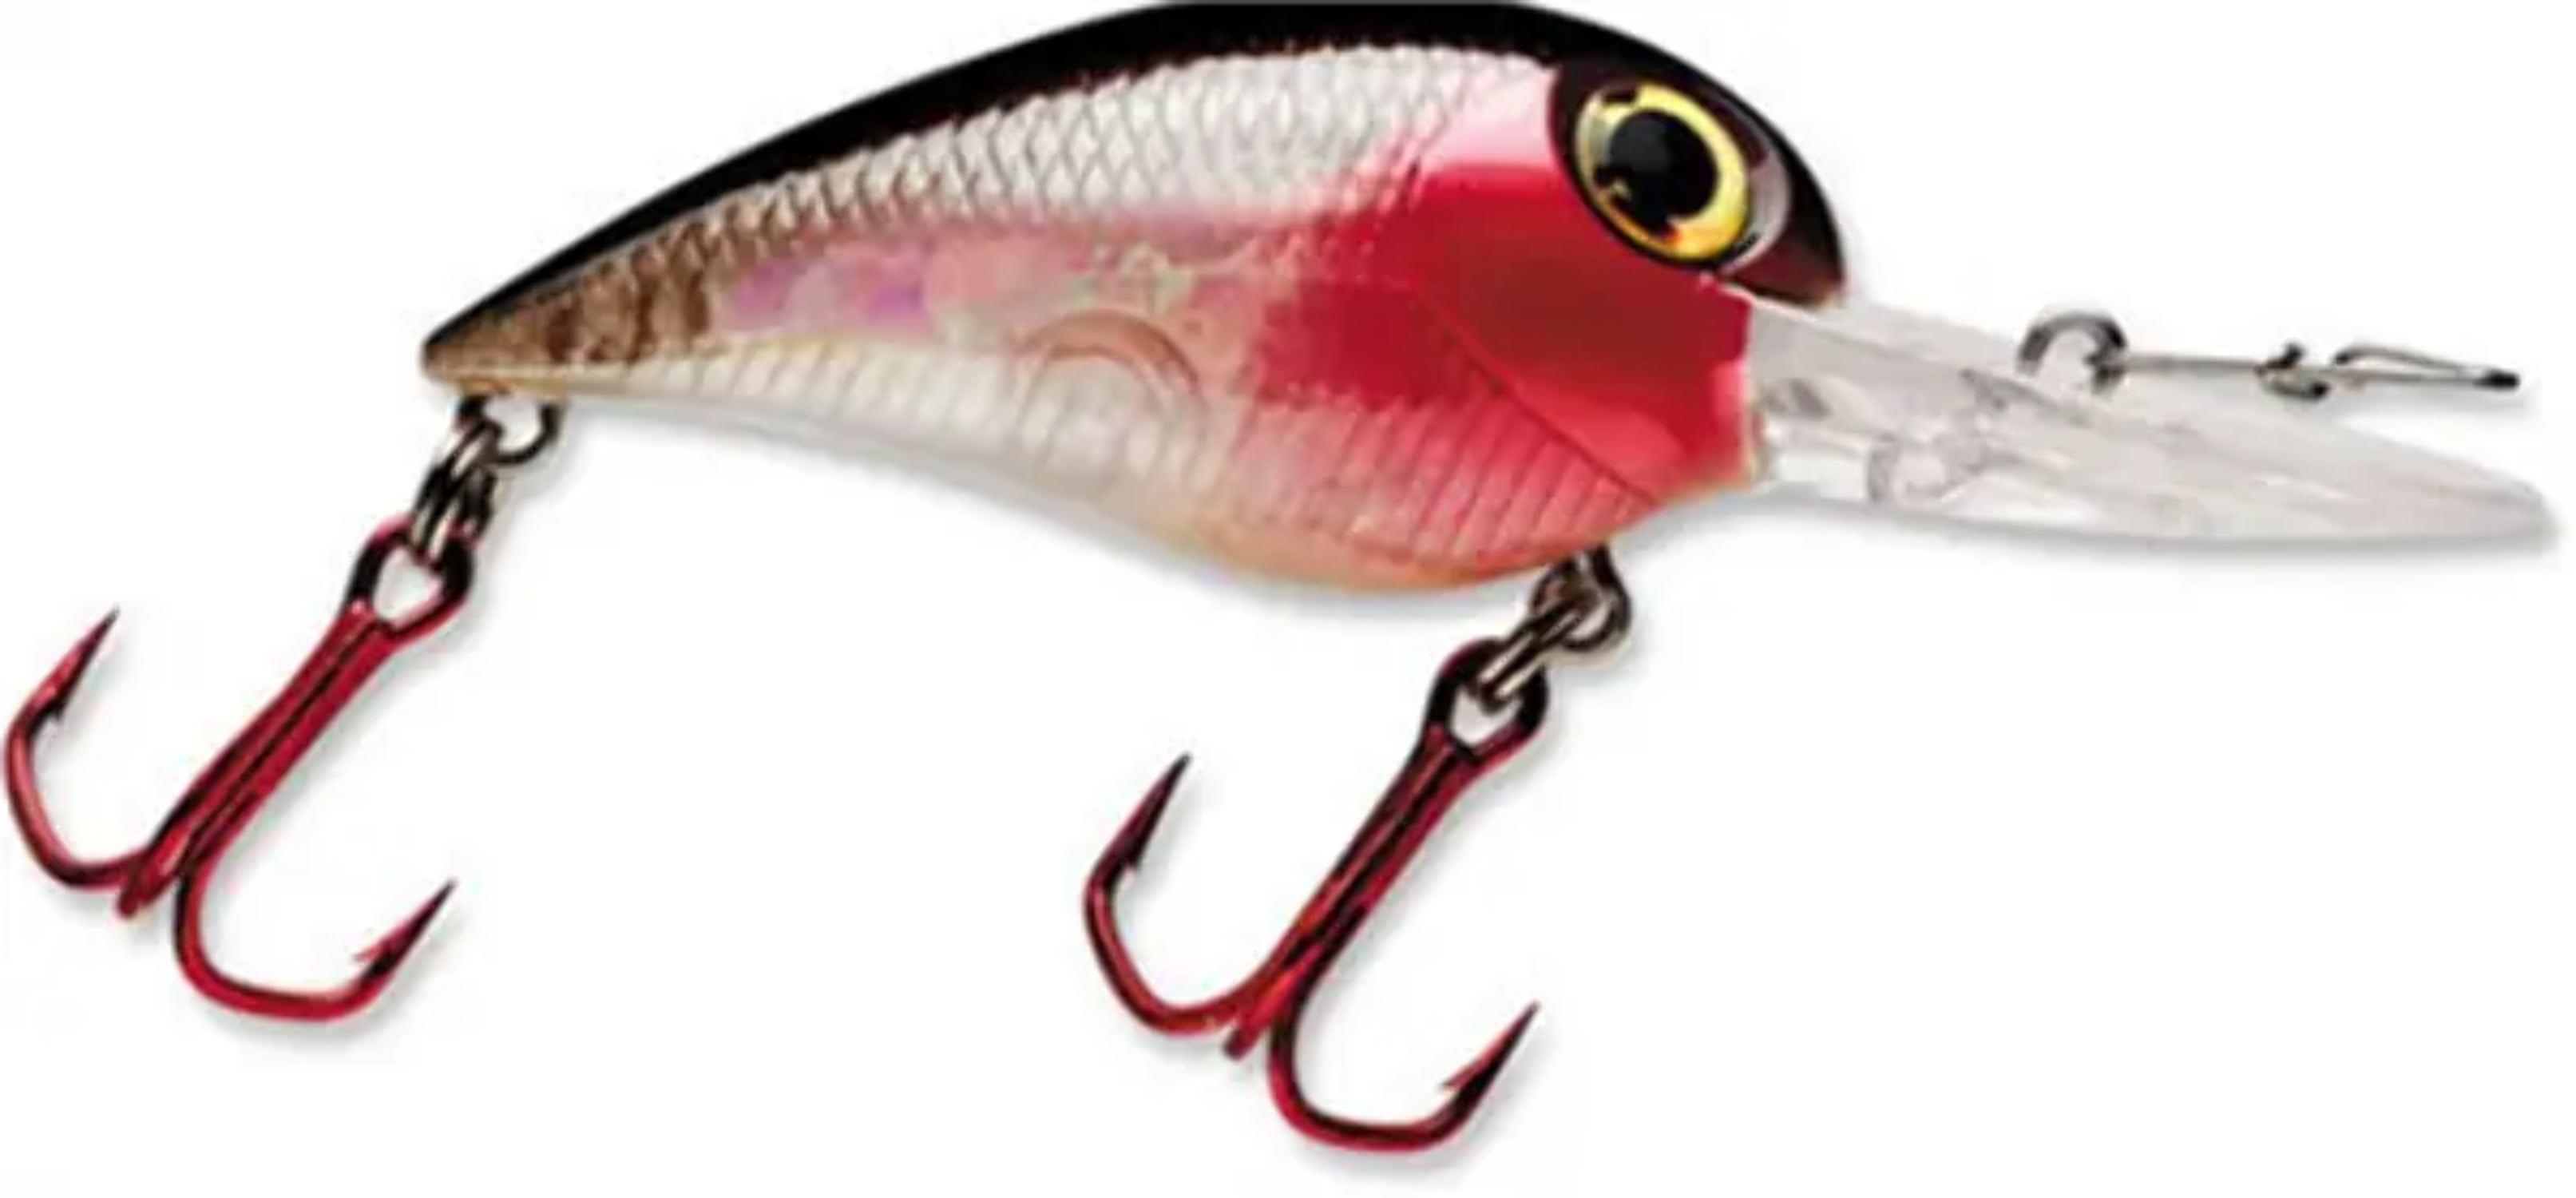  Storm Wiggle Wart MadFlash Hard Bait Lure : Fishing Topwater  Lures And Crankbaits : Sports & Outdoors